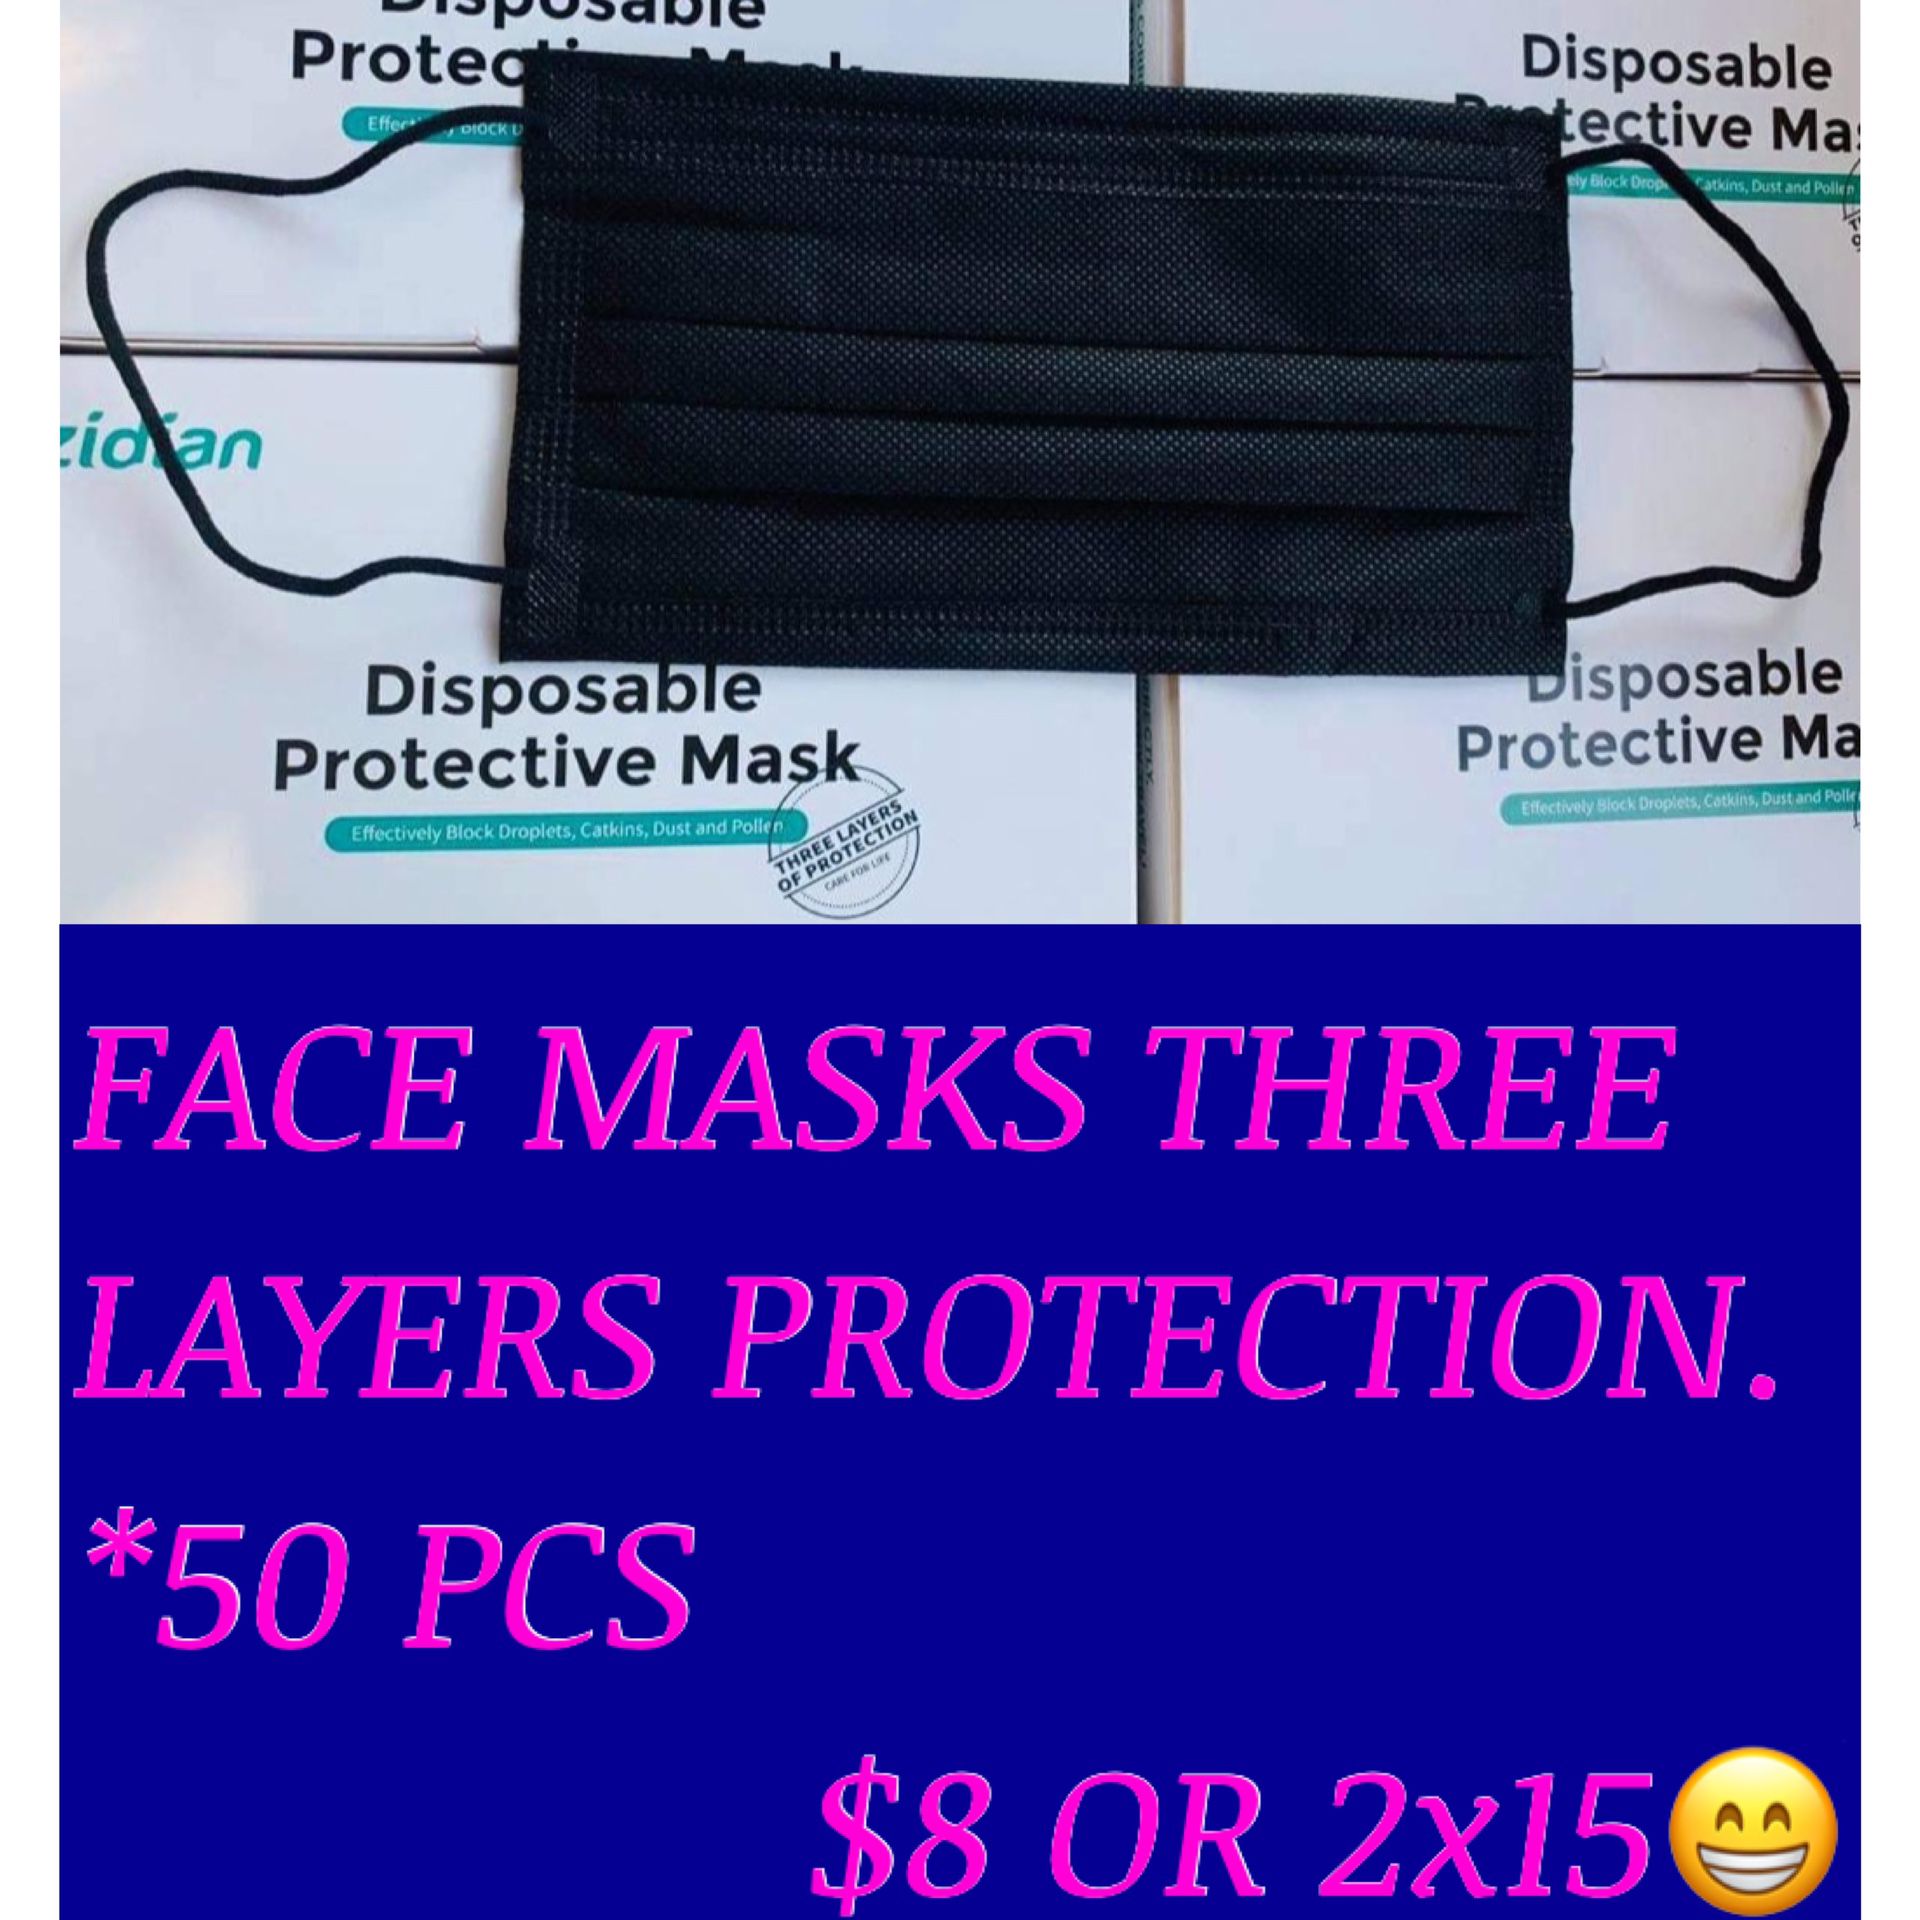 Face masks 3 Layers Protection ..50 PCS •Pick Up ONLY